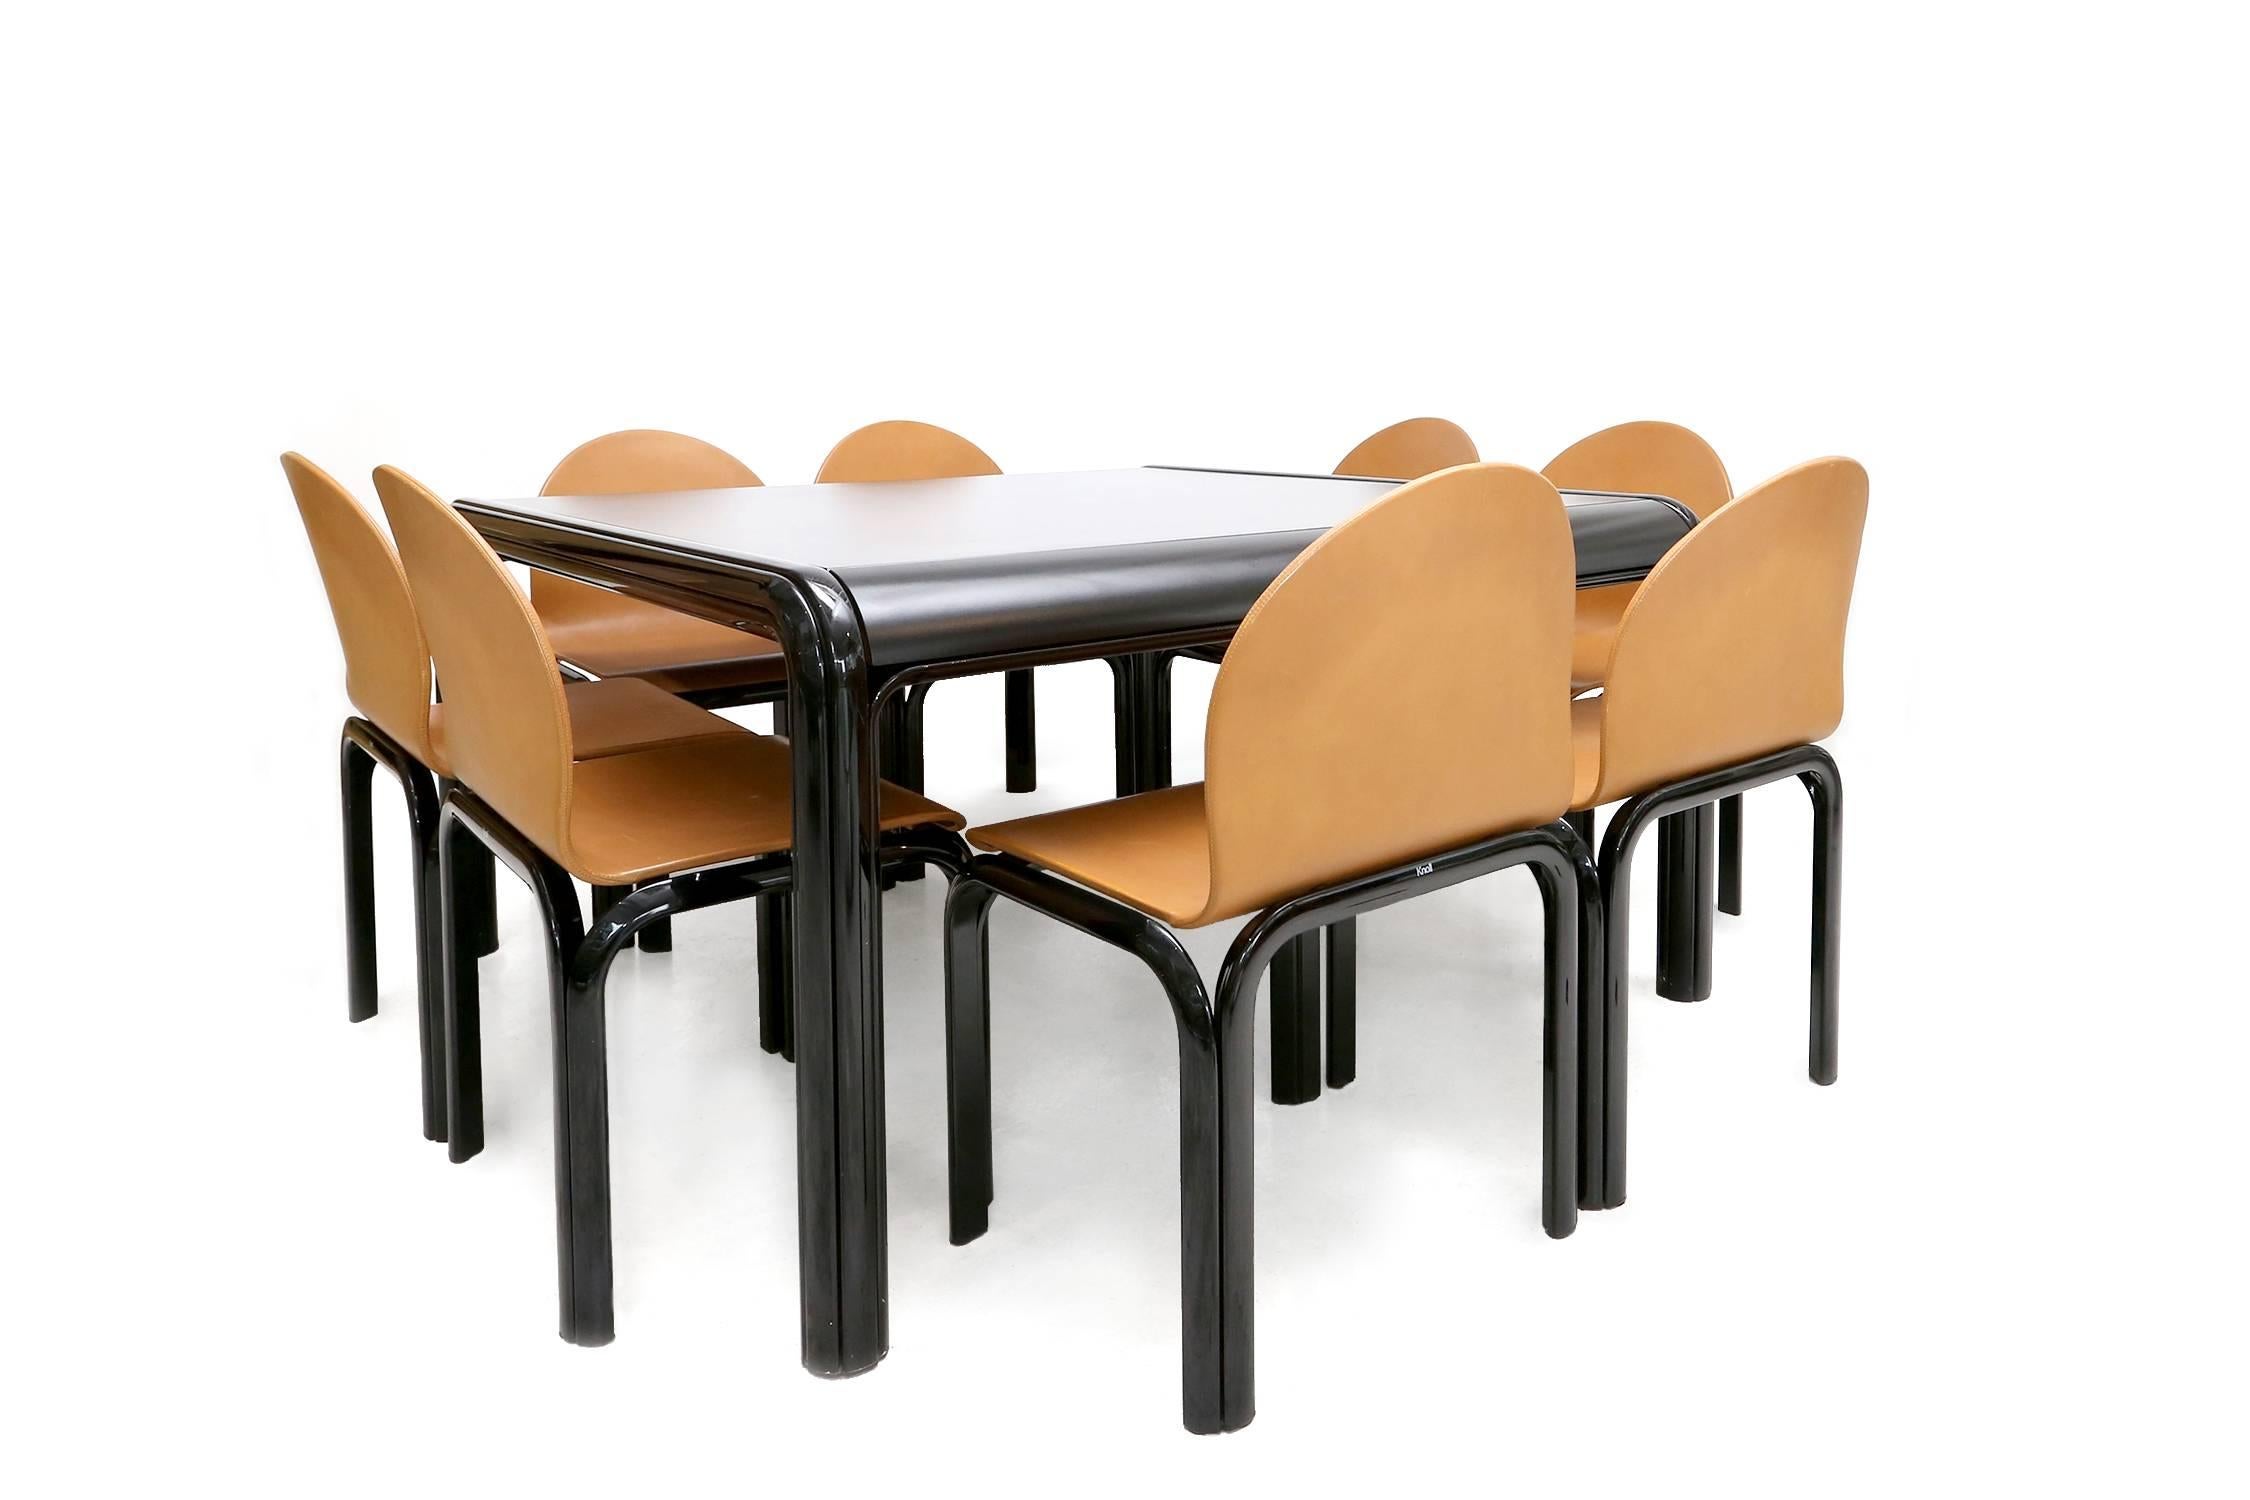 American GAE AULENTI for KNOLL DINING TABLE